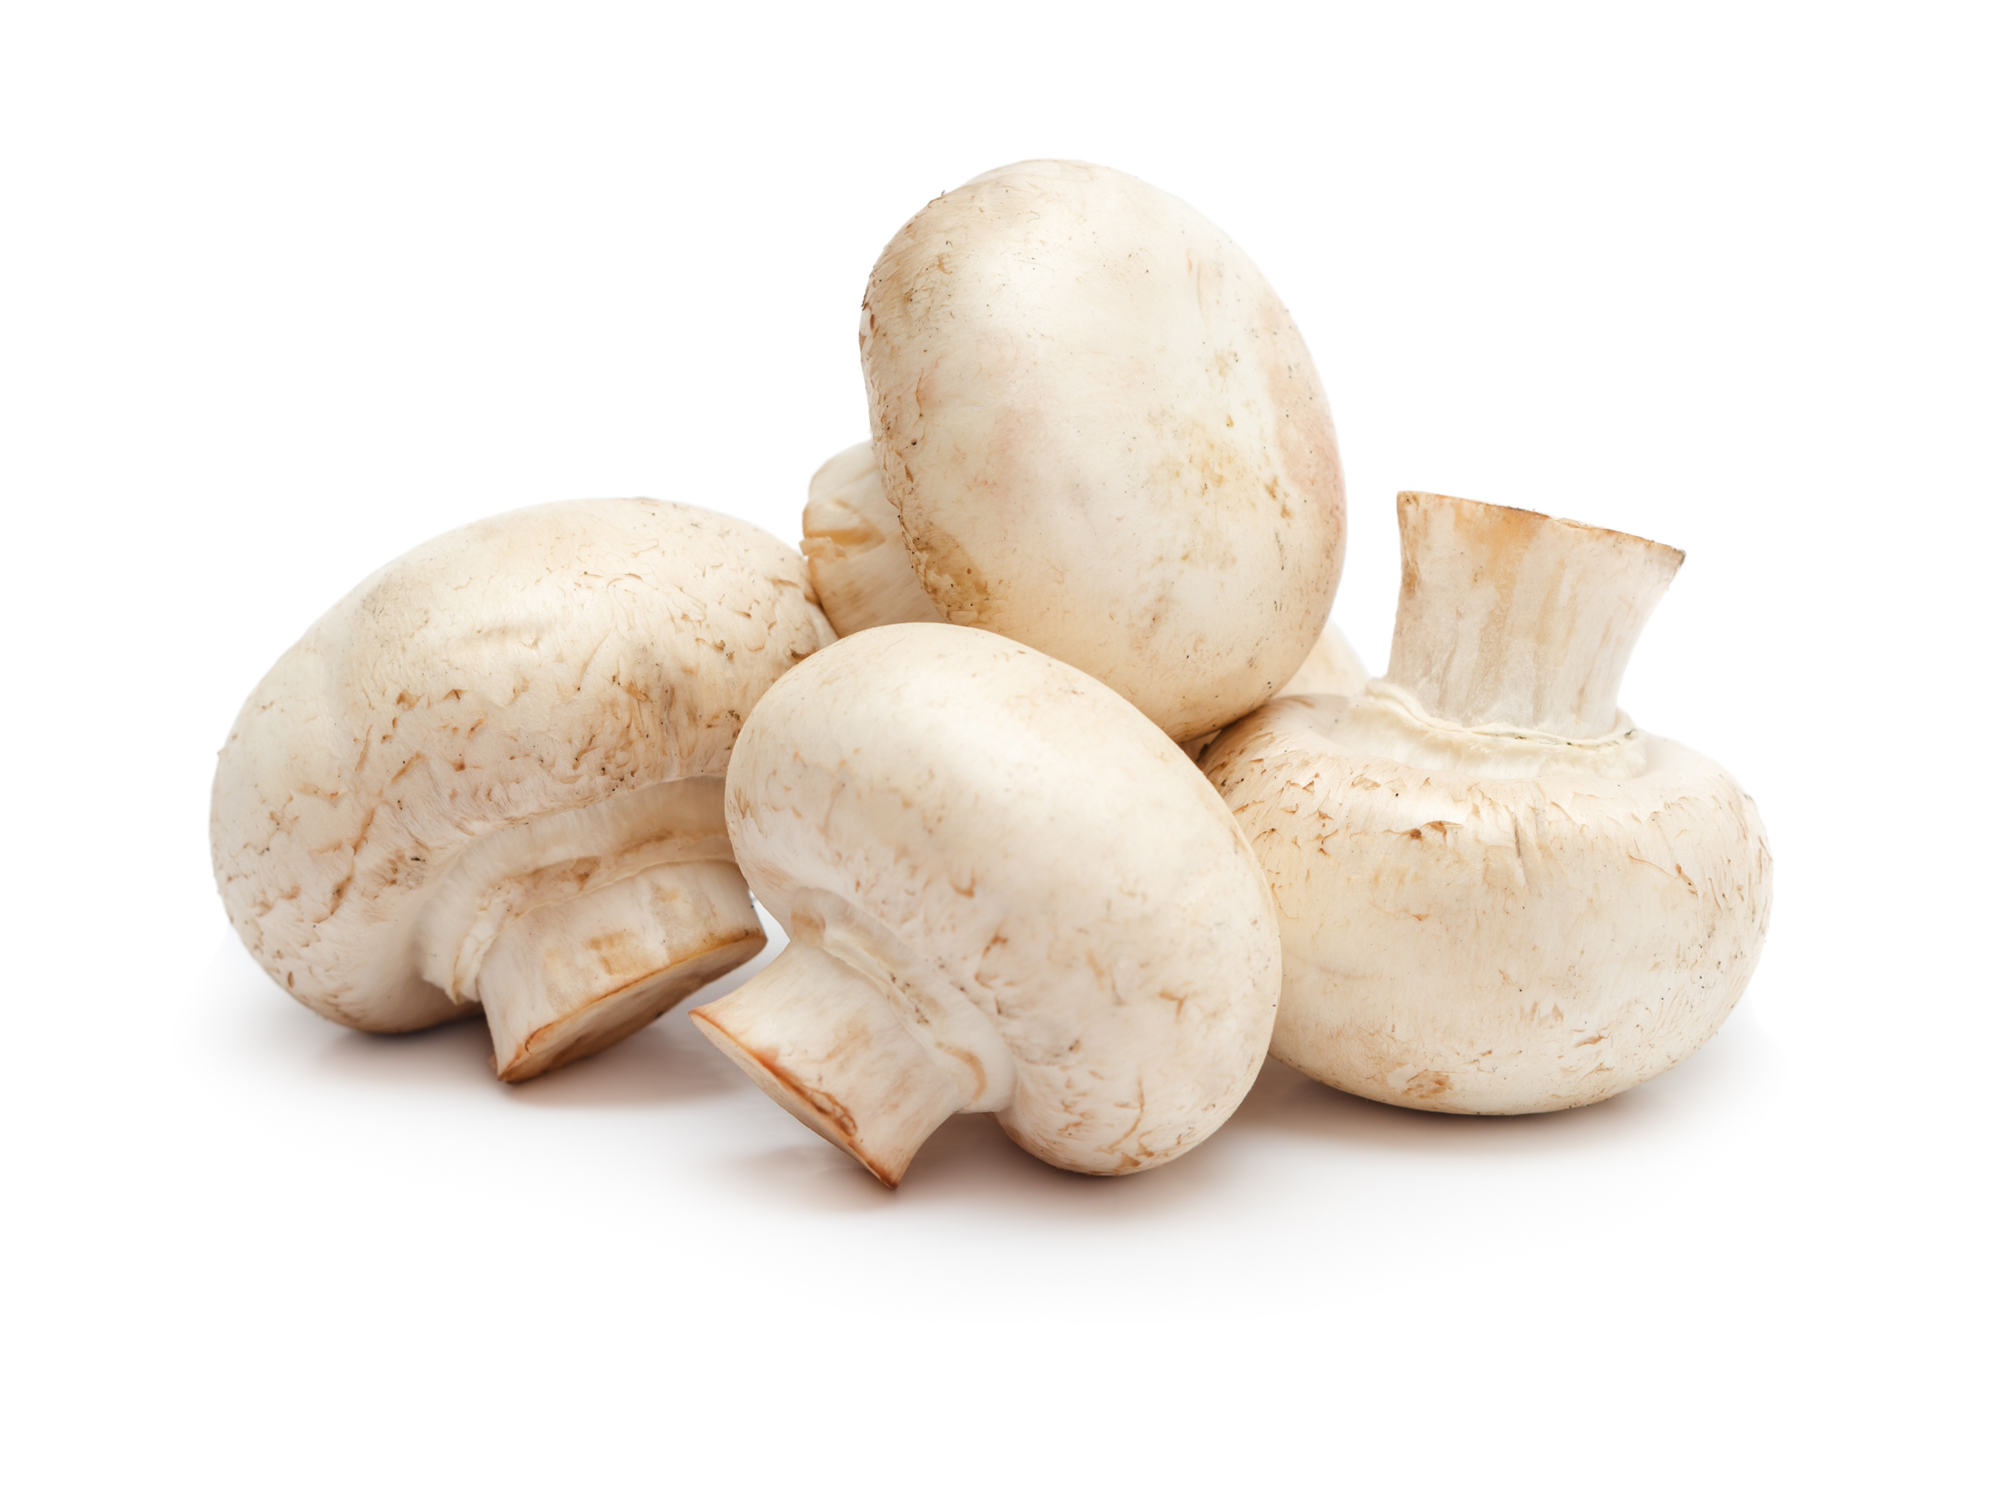 10+ ways medicinal mushrooms protect your body - Easy Health Options®